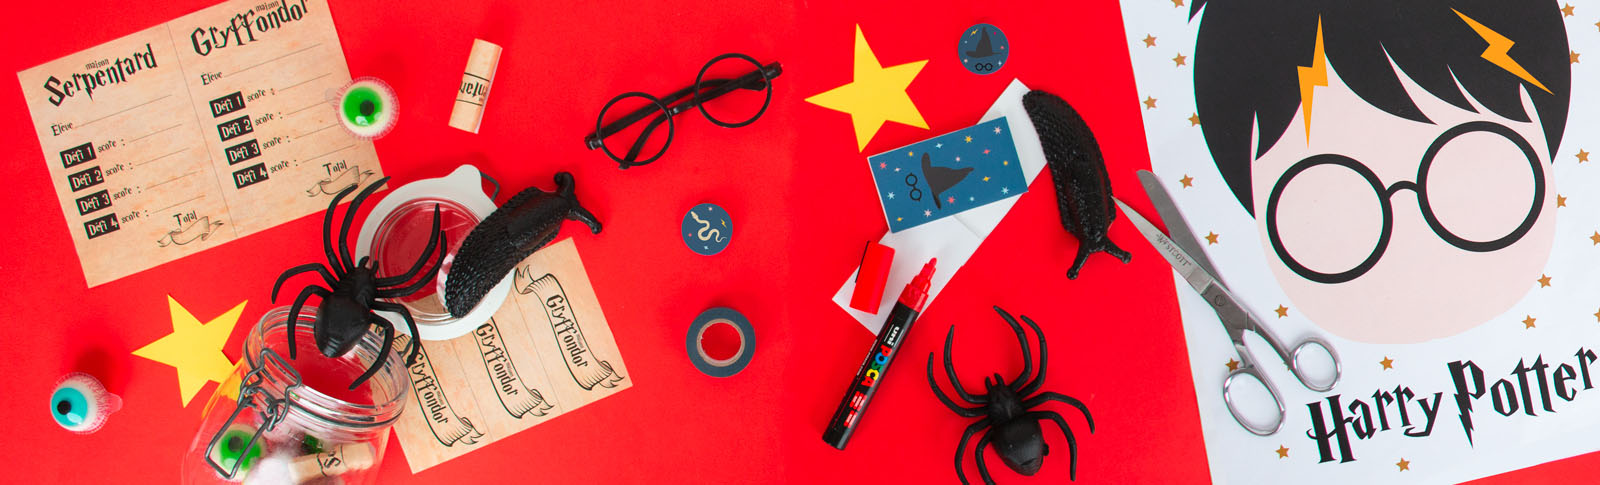 Ideas for a harry potter themed birthday